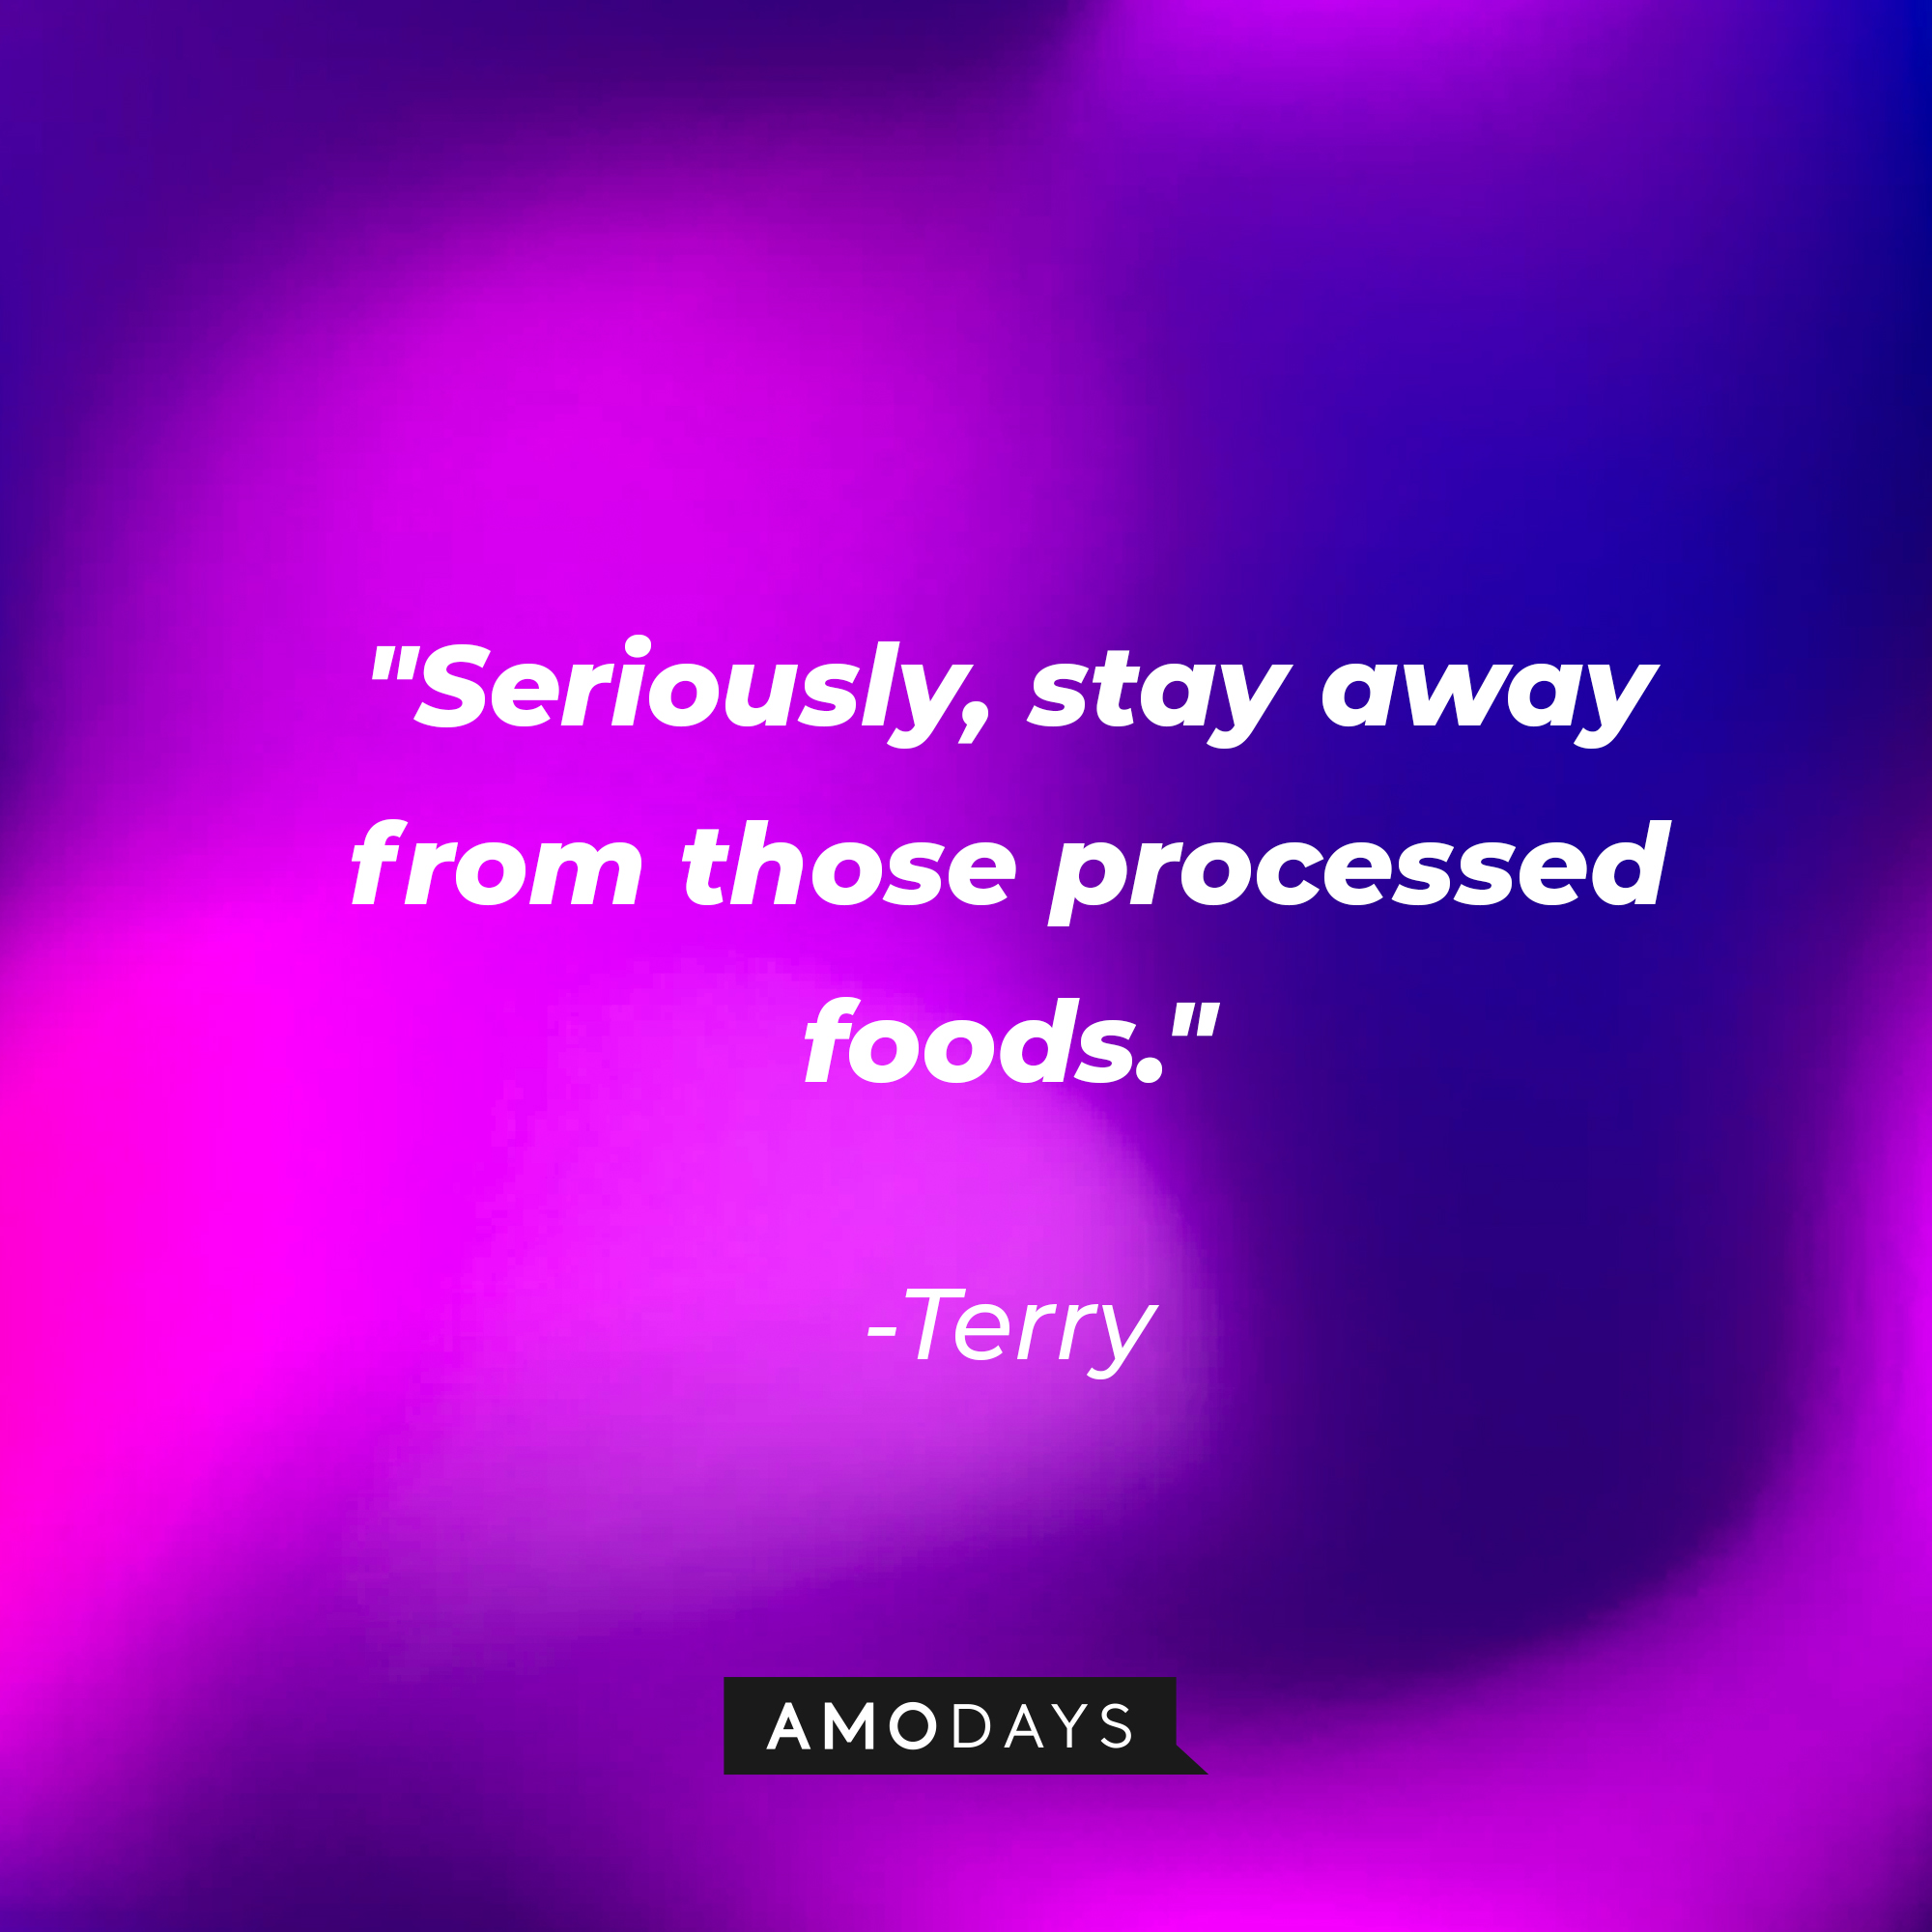 Terry's quote: "Seriously, stay away from those processed foods." | Source: youtube.com/pixar